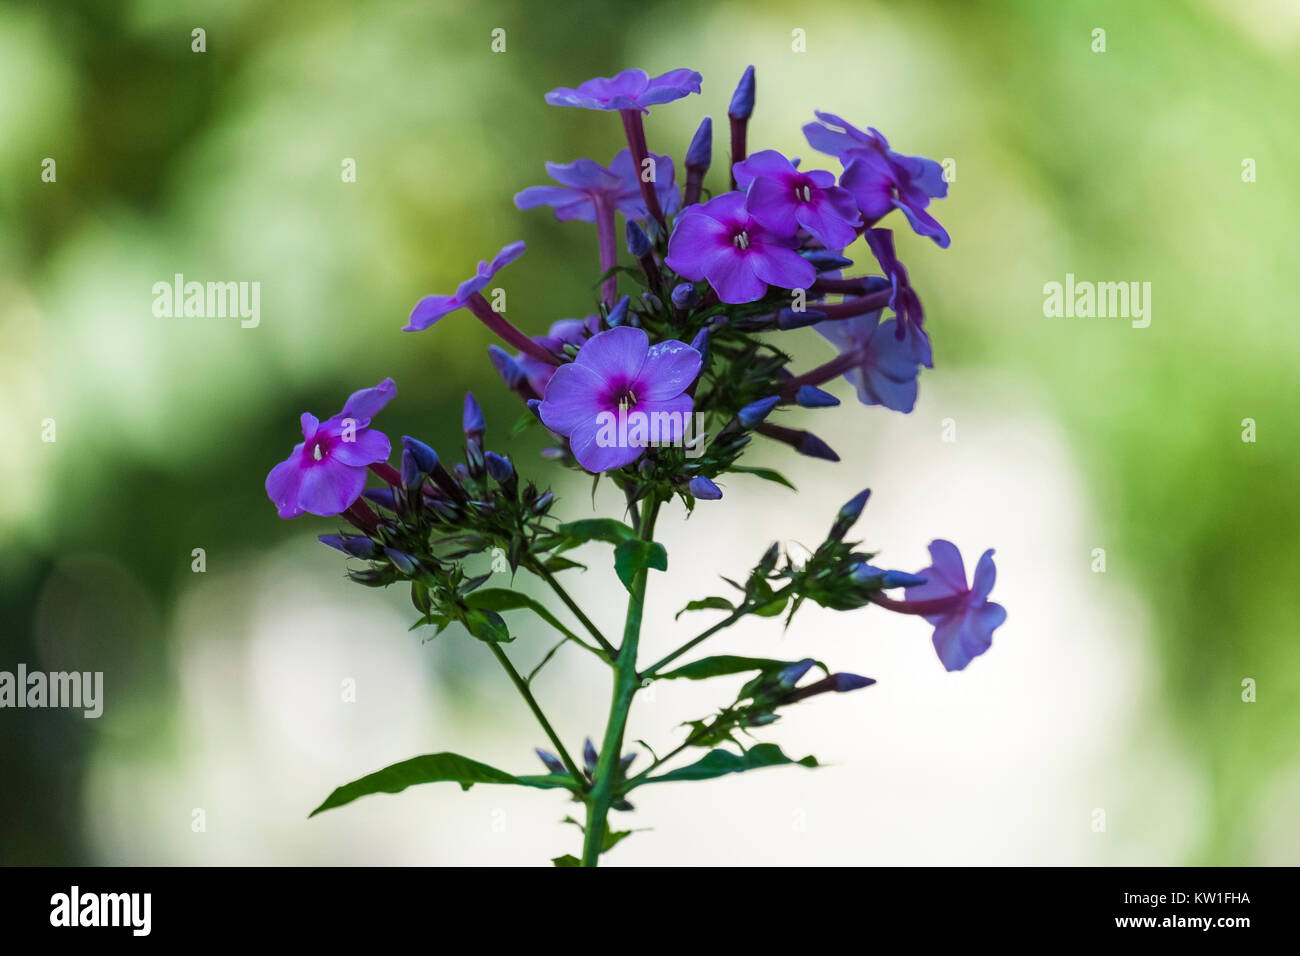 Blue flowers of tubular-funnel-shaped form collected in a complex inflorescence (Phlox paniculata) Stock Photo